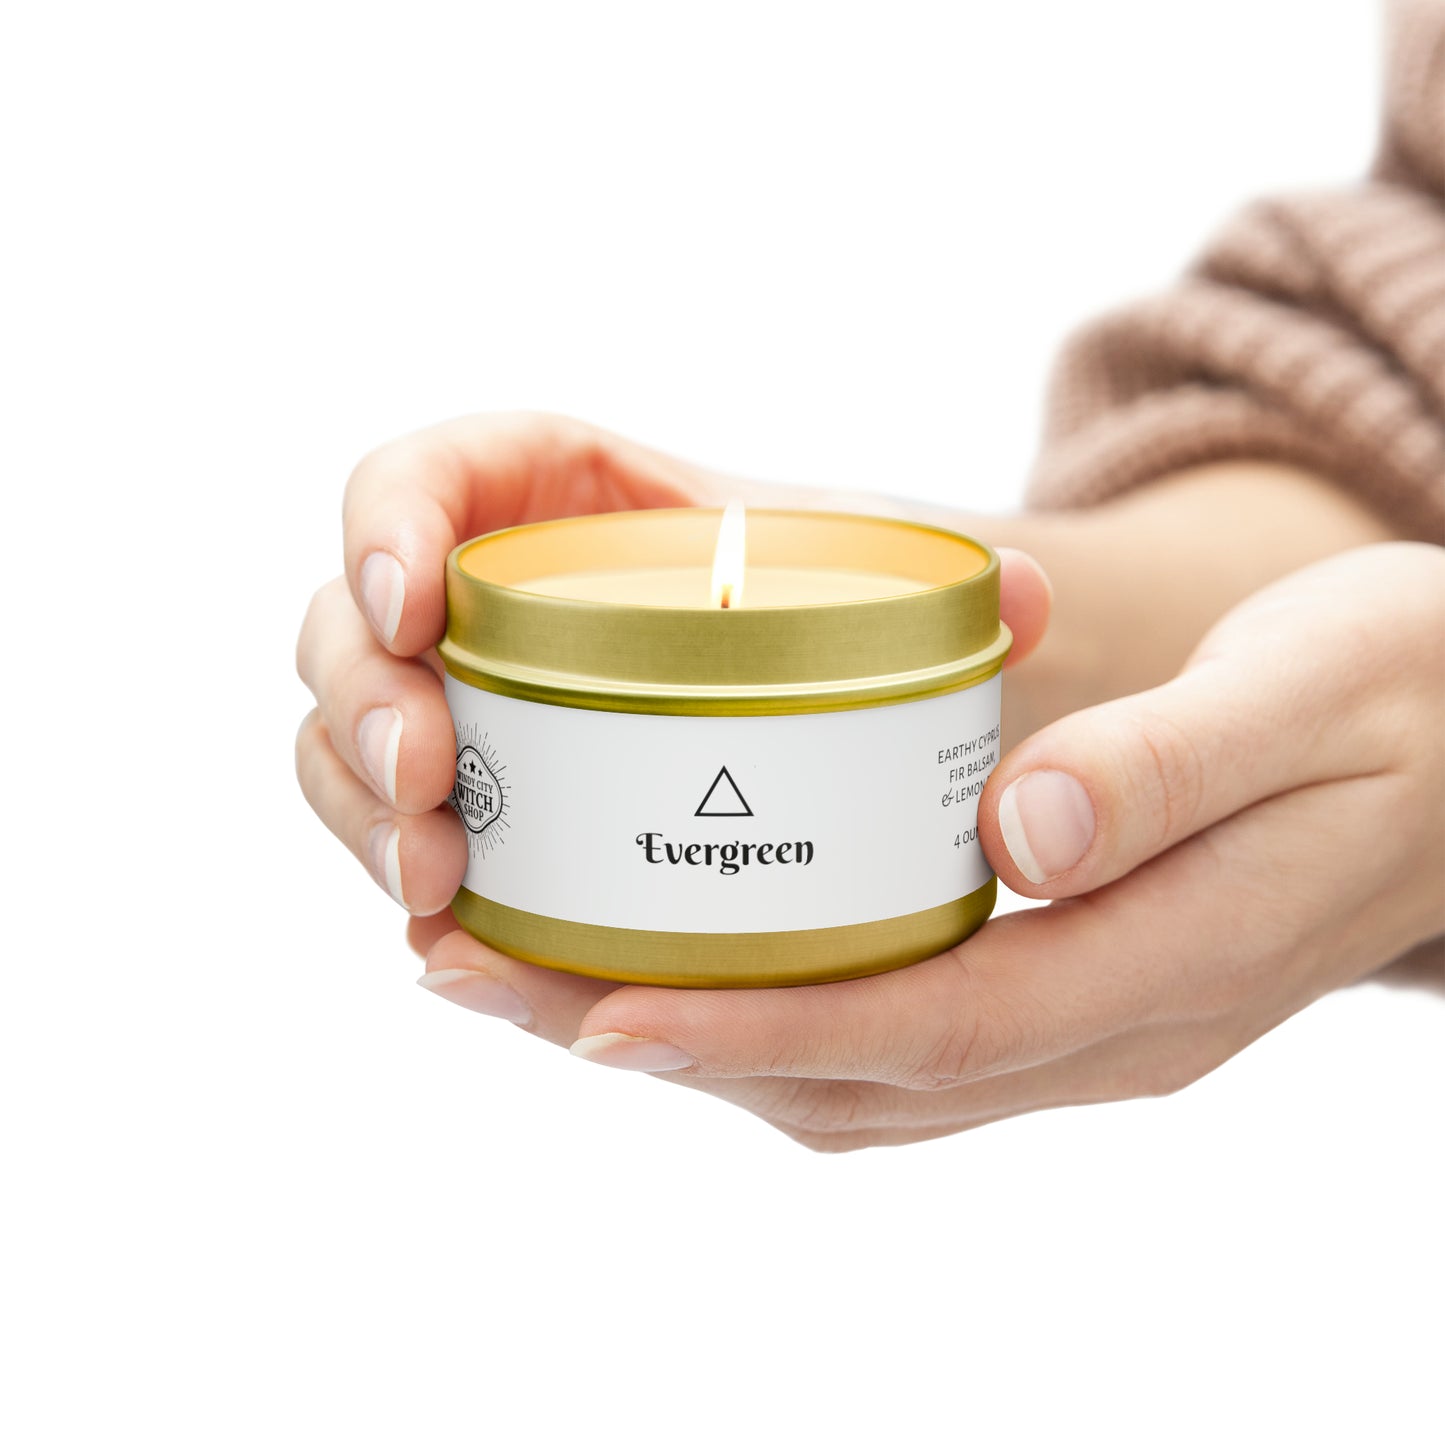 Evergreen - tin candle, scented